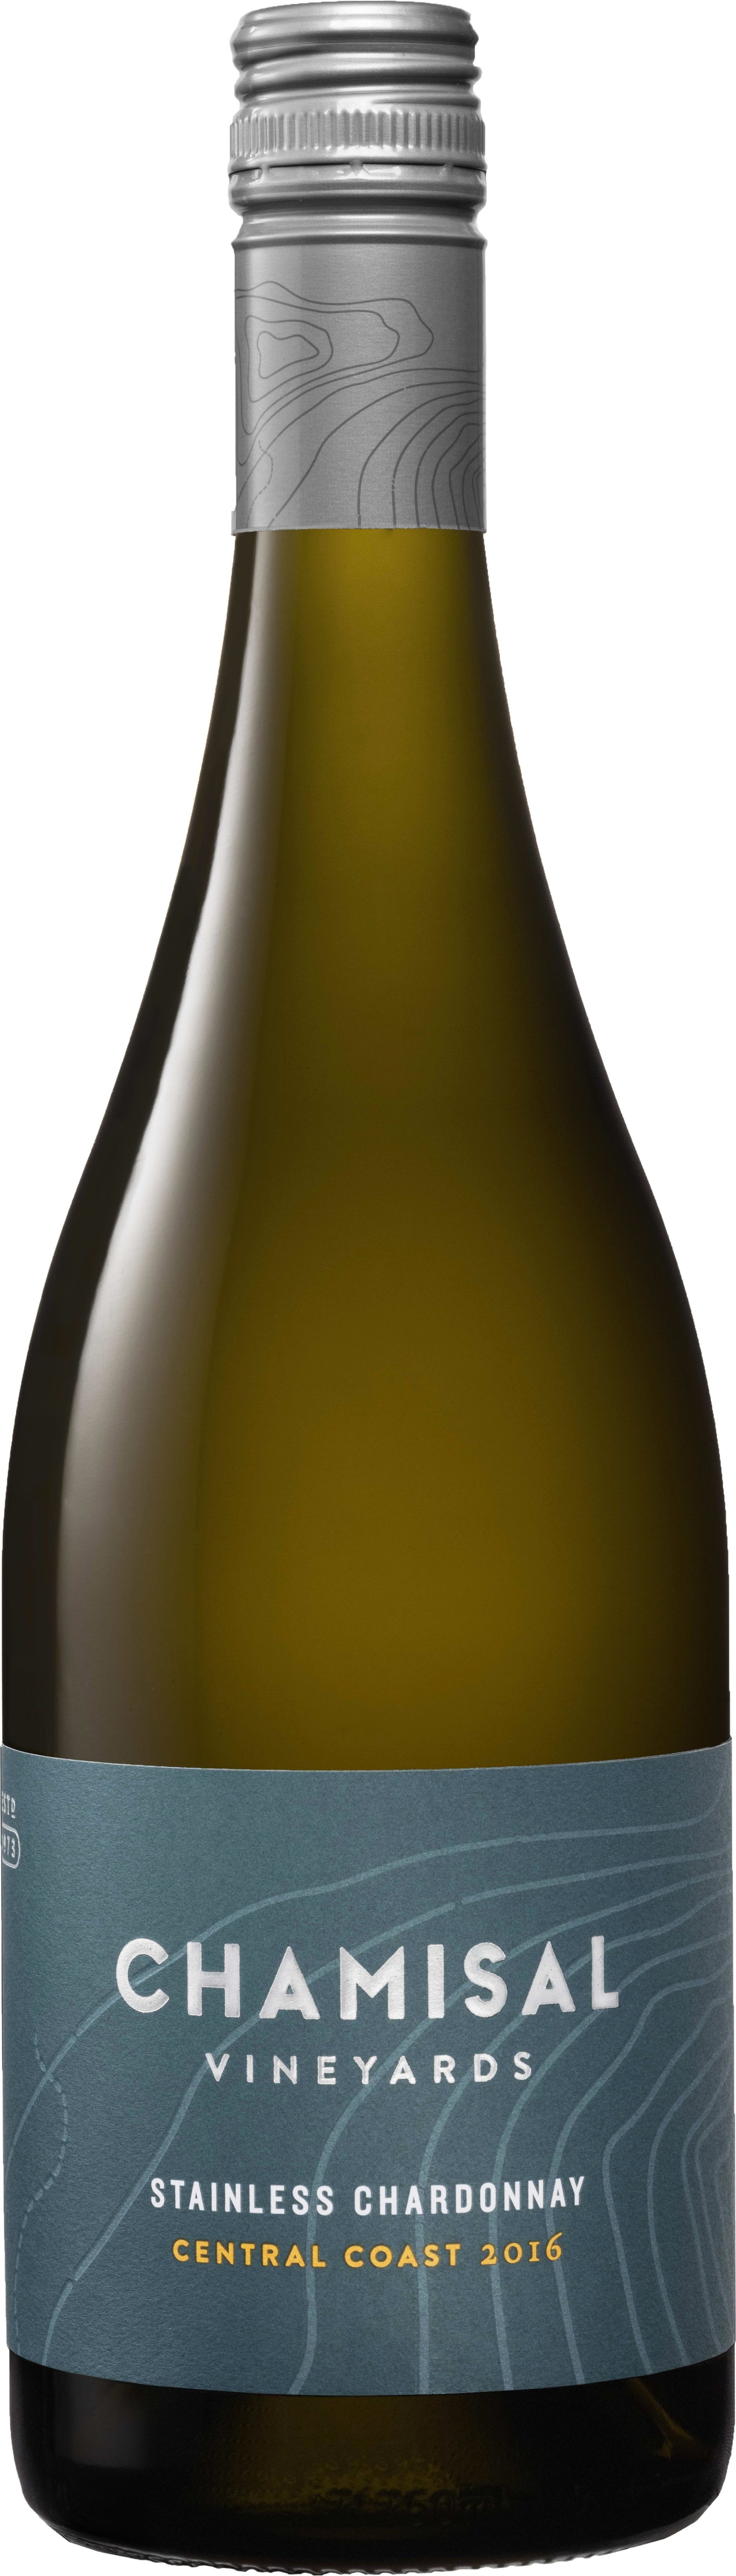 Chamisal Vineyards Chardonnay Unoaked Stainless 2016